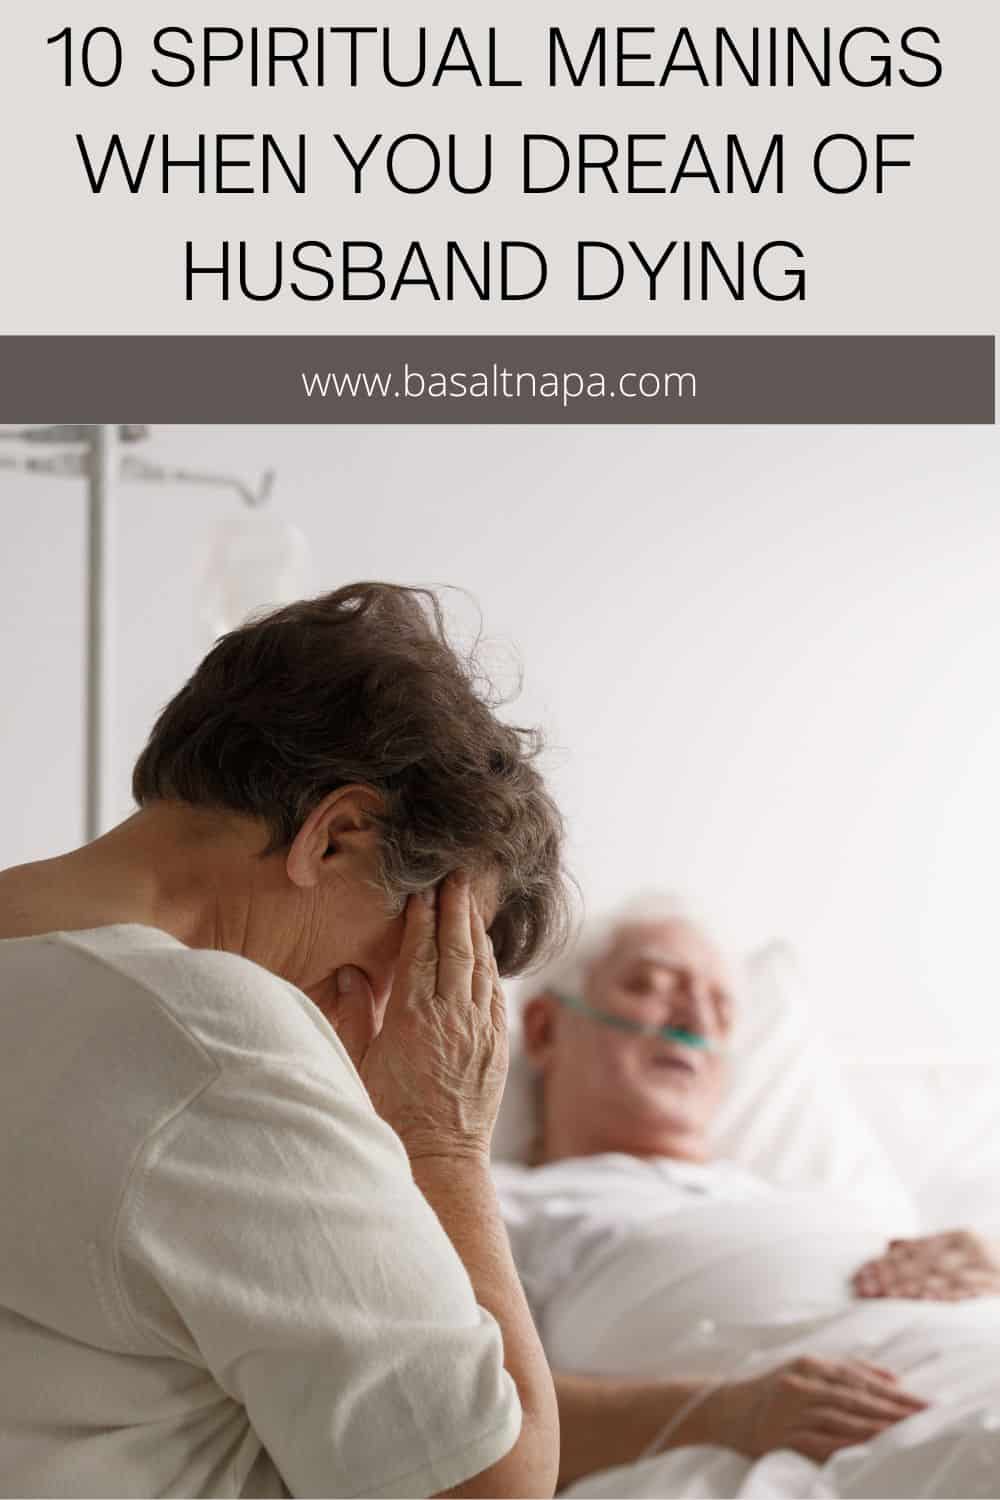 10 Spiritual Meanings When You Dream Of Husband Dying